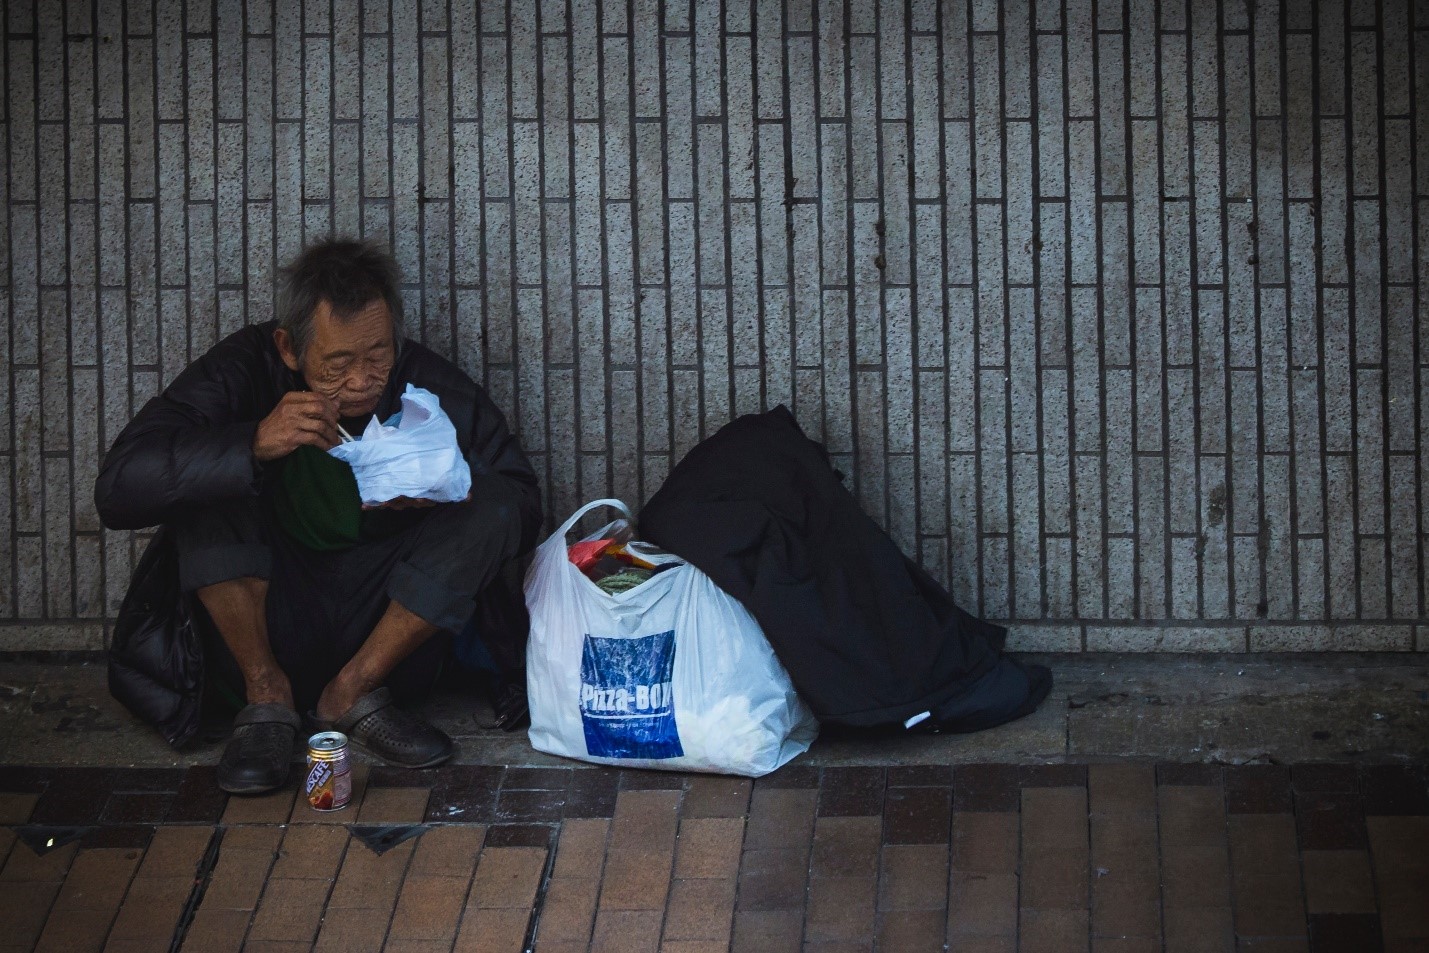 a homeless person having a meal